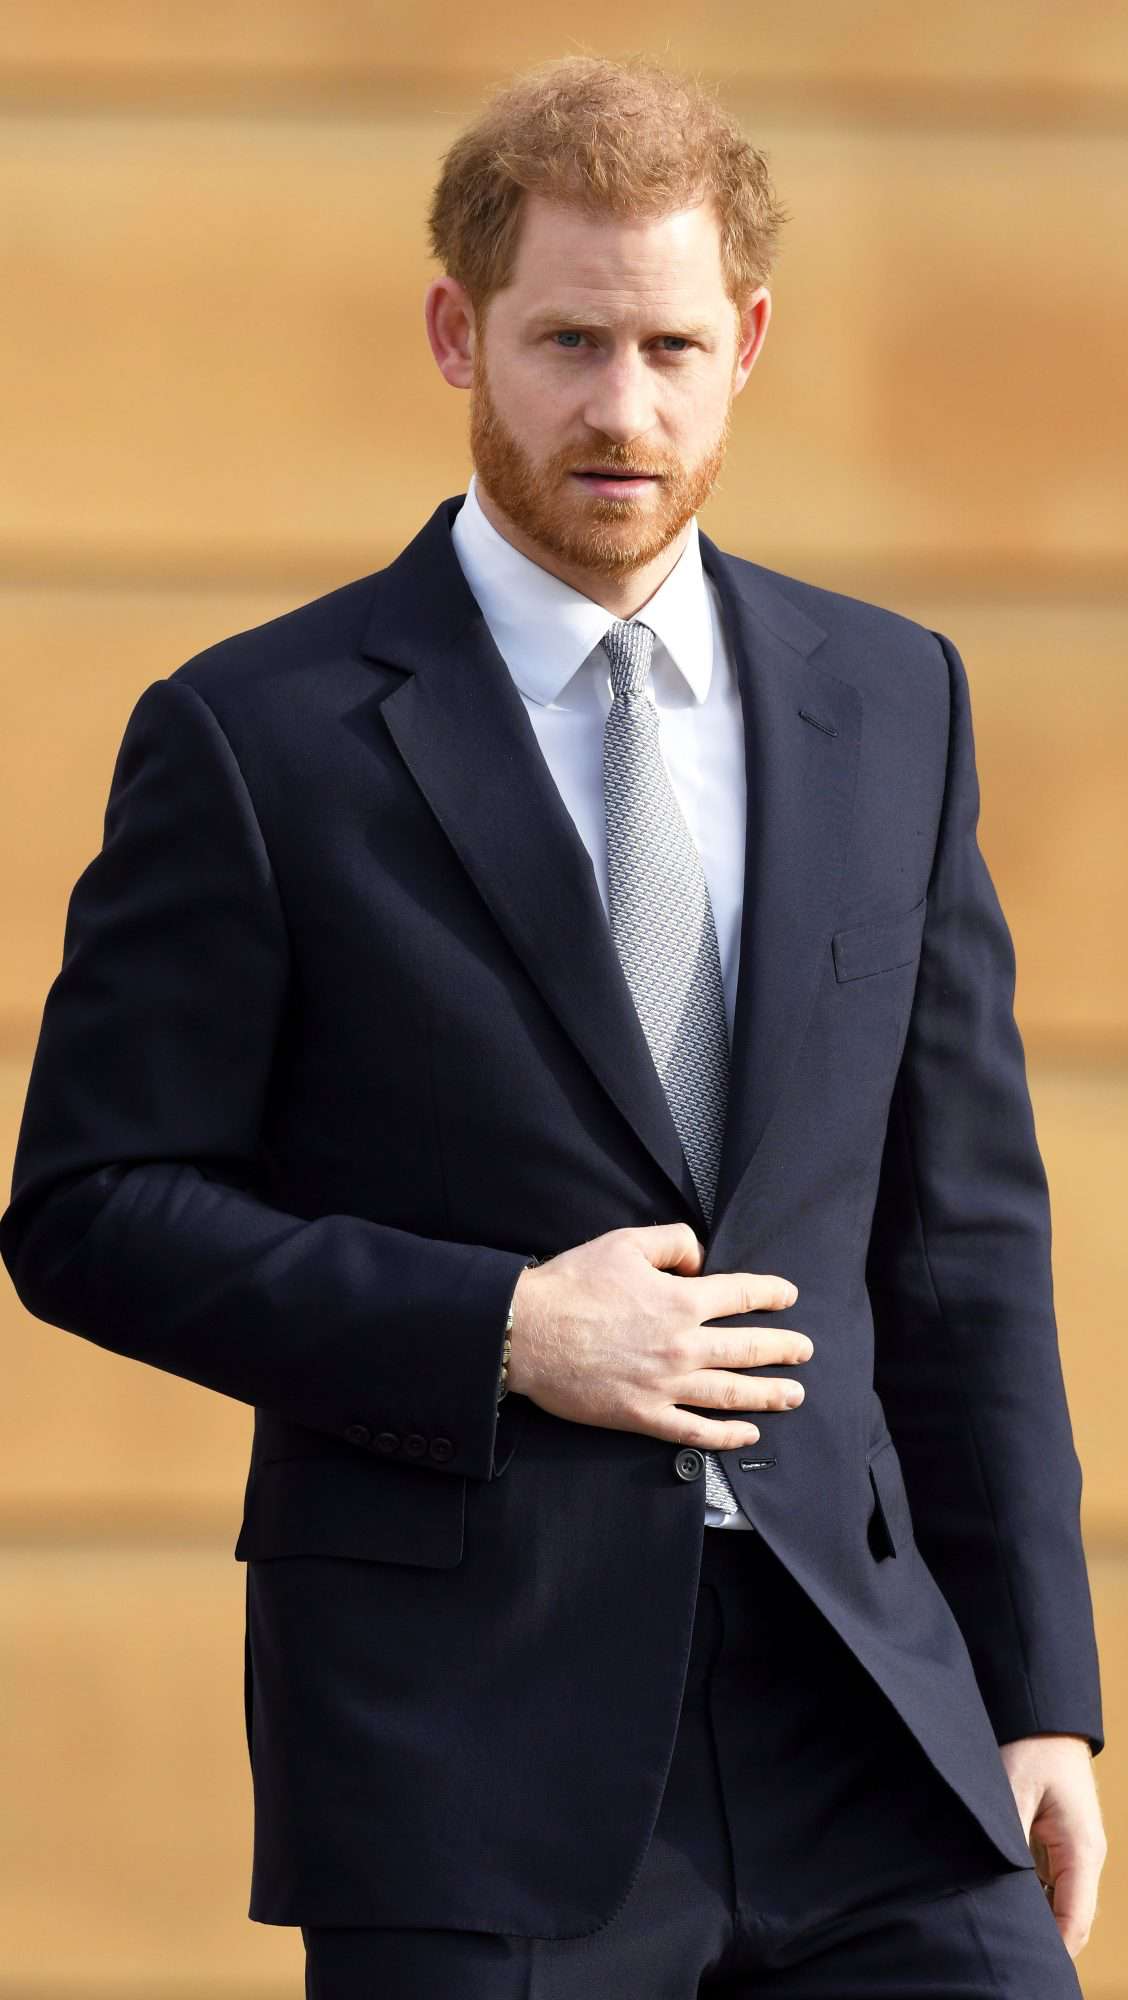 Prince Harry The Duke Of Sussex Hosts The Rugby League World Cup 2021 Draws